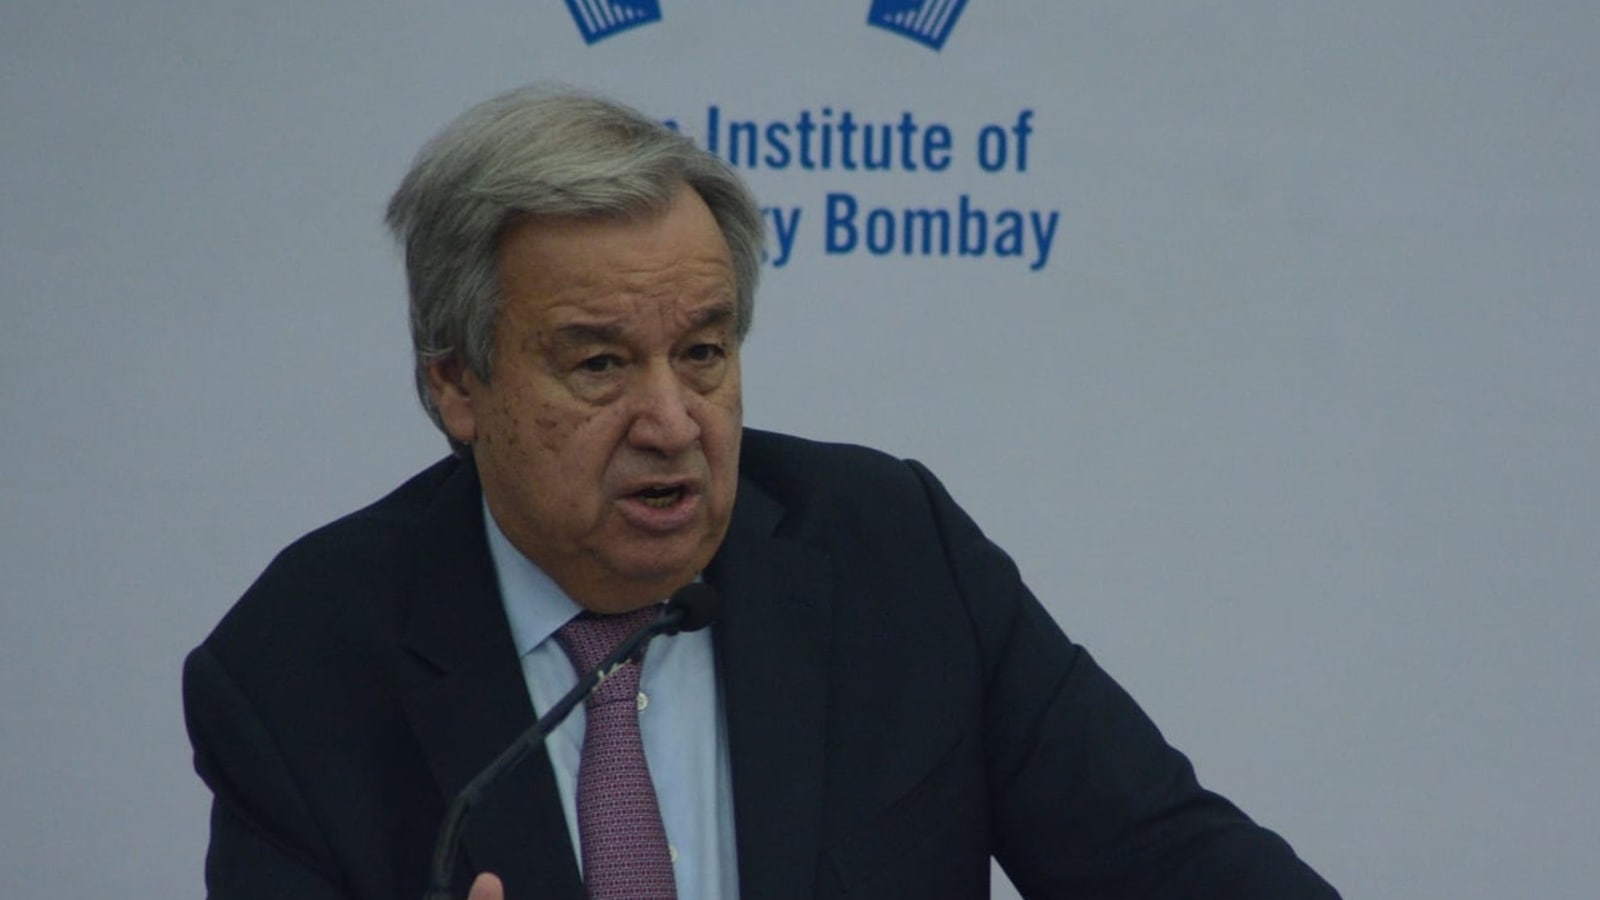 at-iit-bombay-guterres-urges-students-not-to-work-for-those-wrecking-our-climate